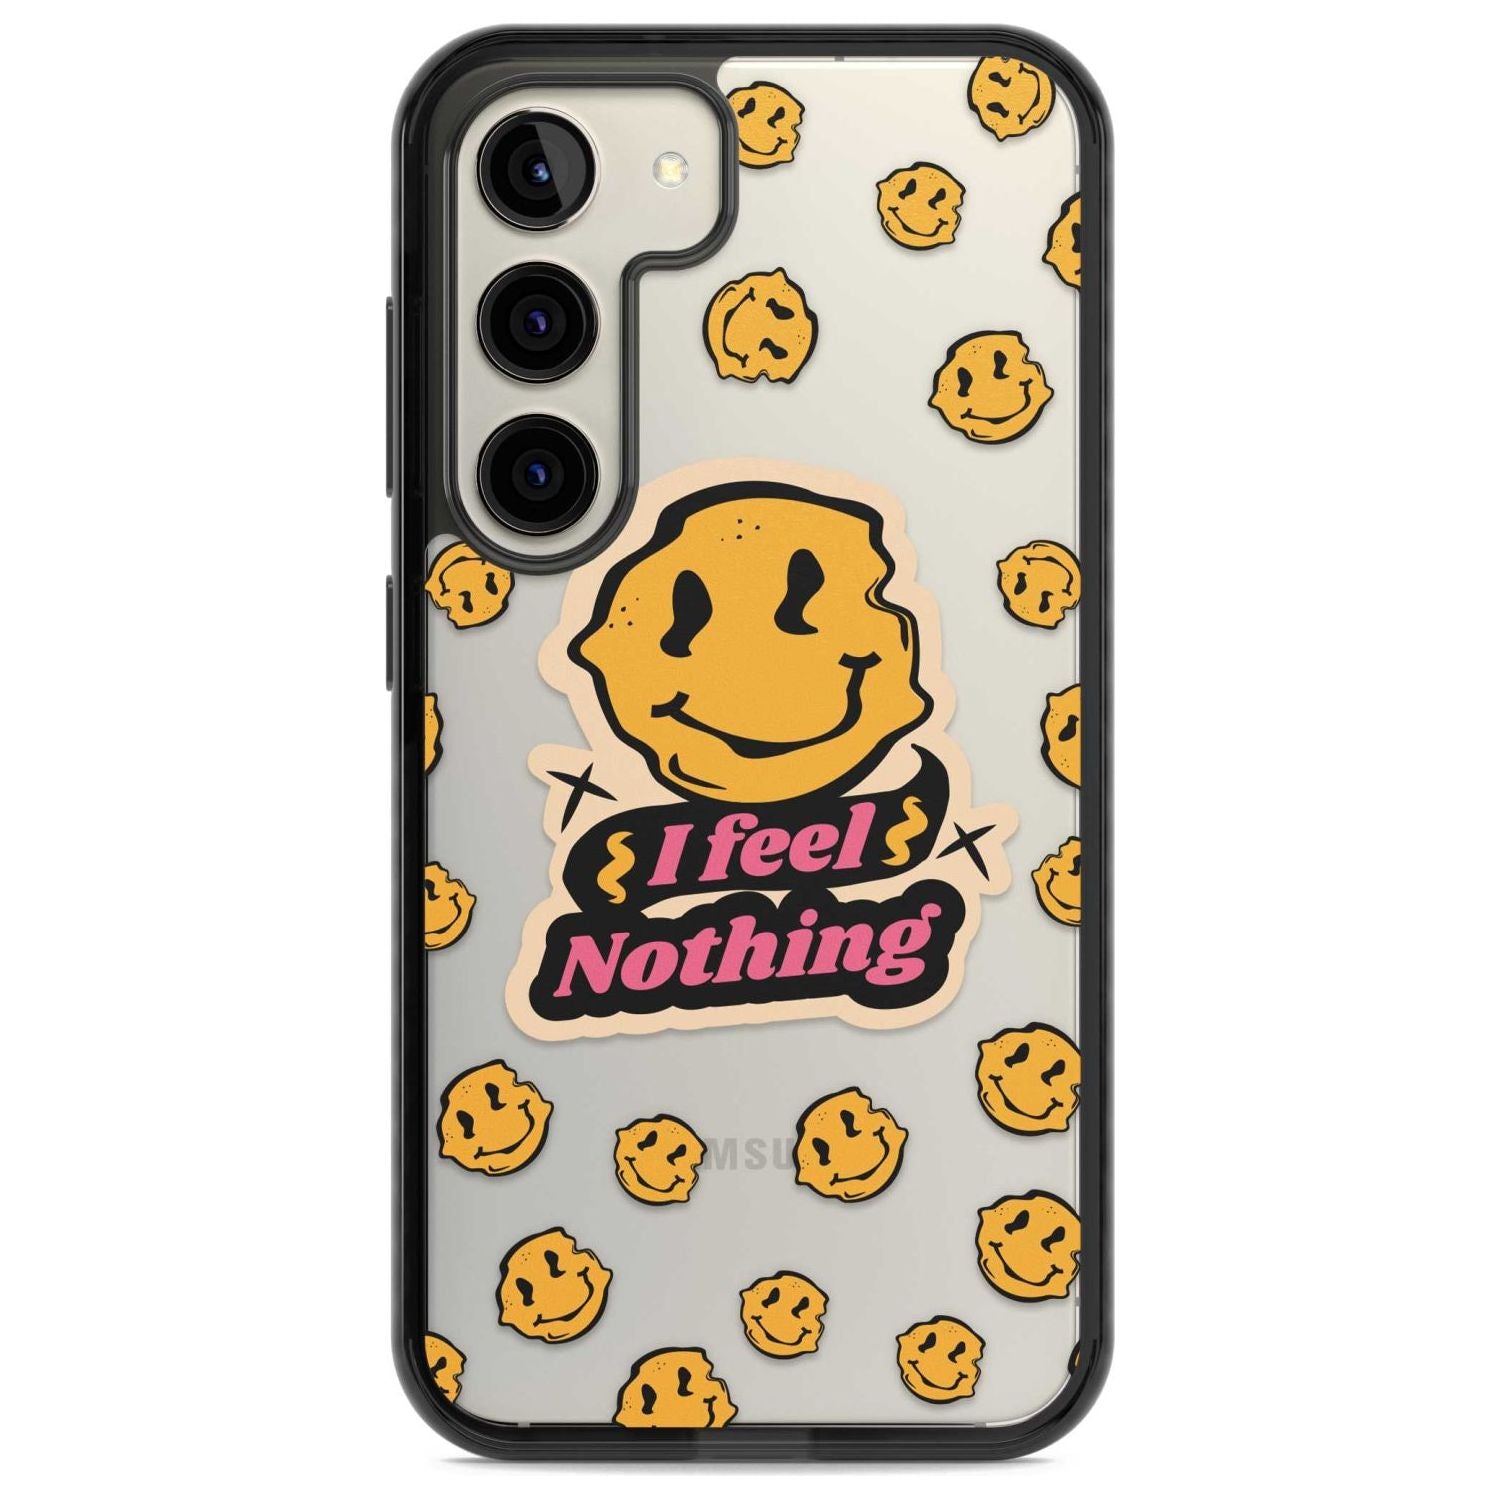 I feel nothing (Clear) Phone Case Samsung S22 / Black Impact Case,Samsung S23 / Black Impact Case Blanc Space